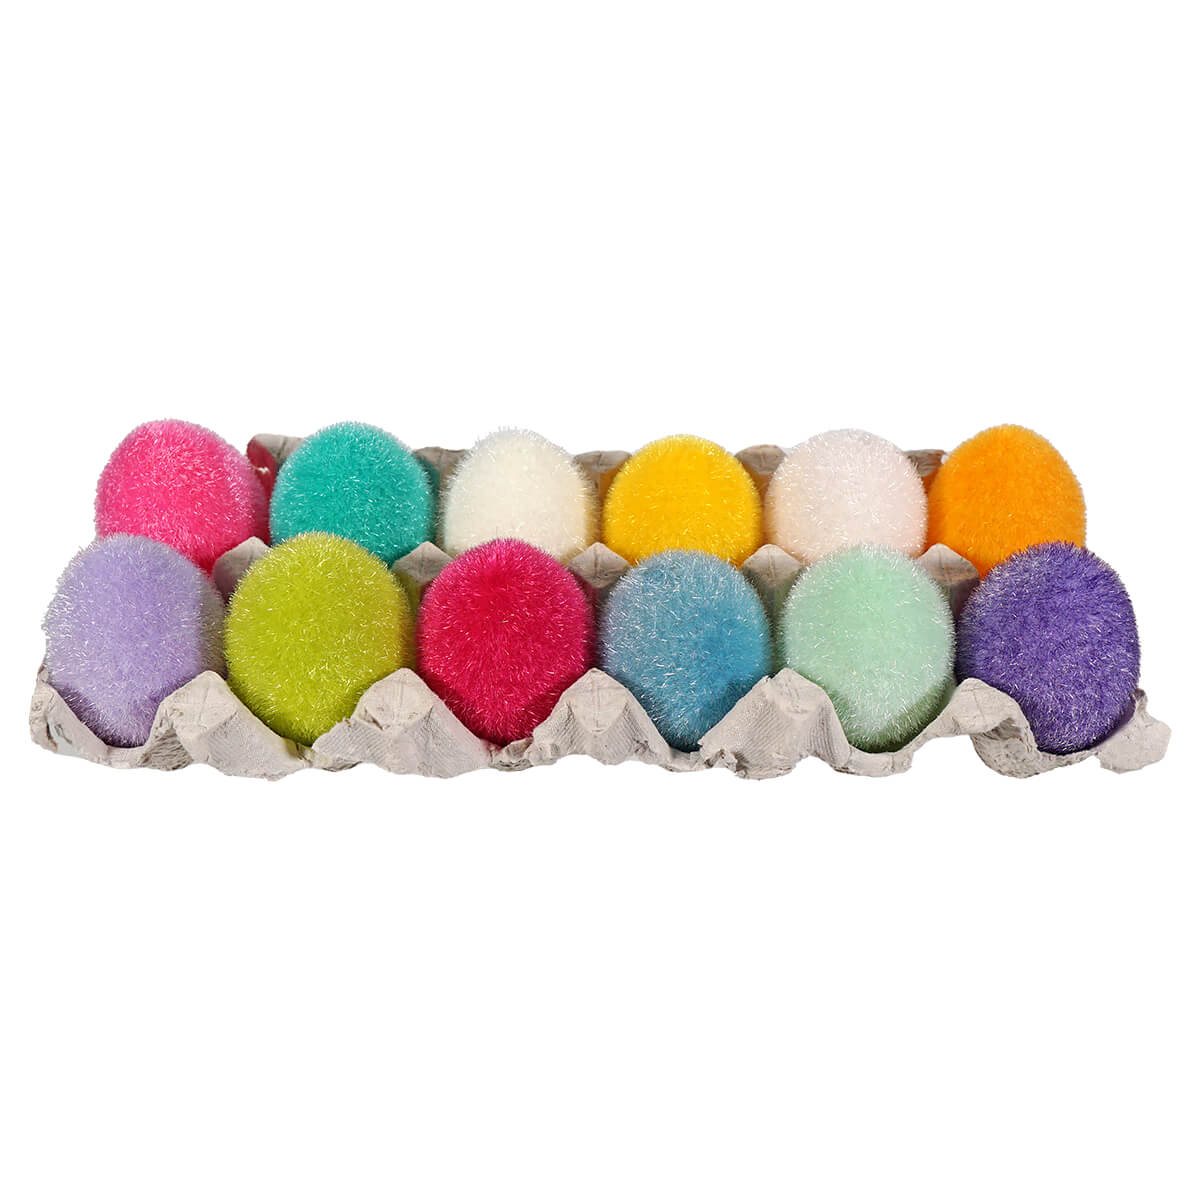 Flocked Multicolored Eggs With Tray Set/12